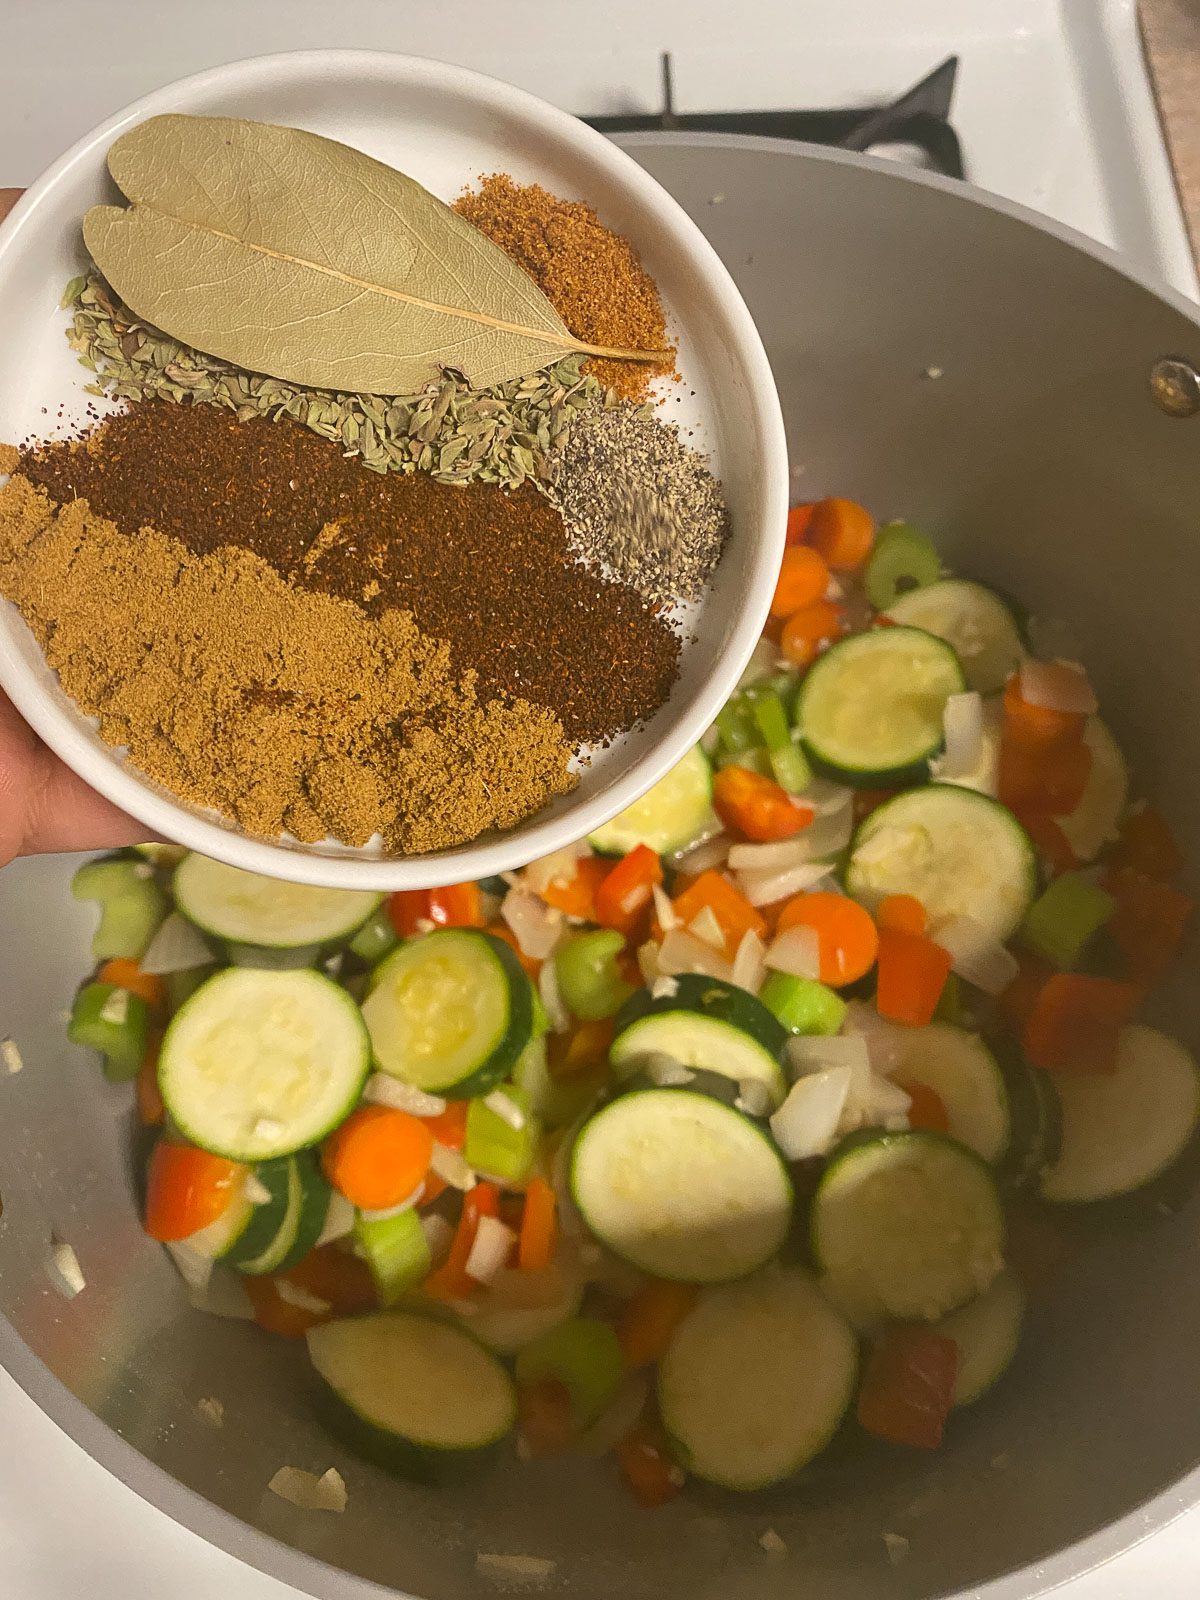 process of adding spices to mixed pan of veggies